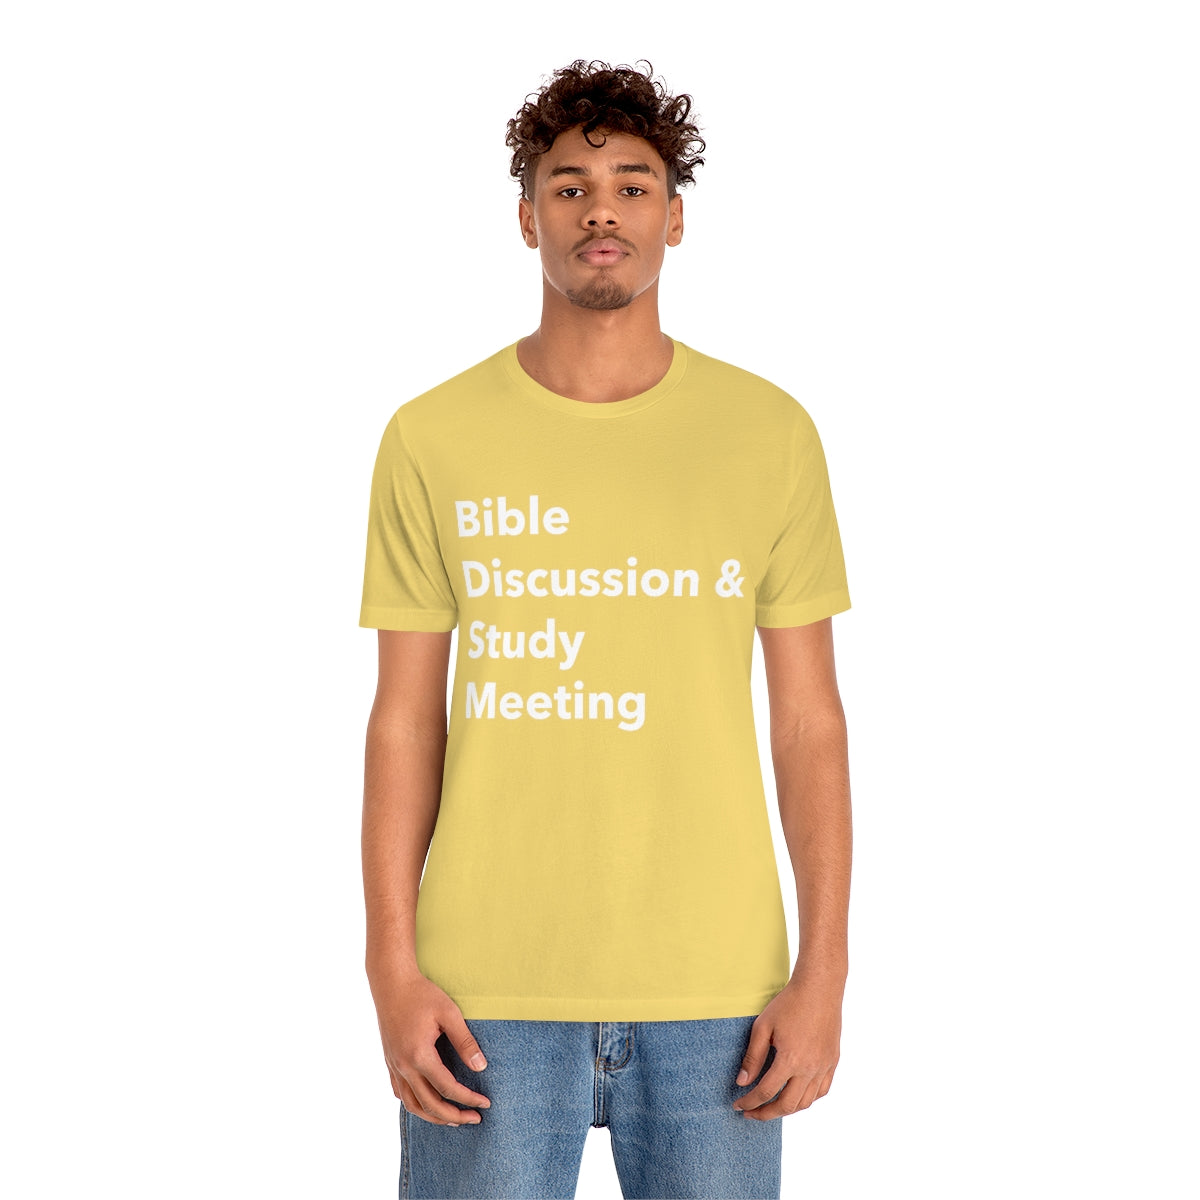 Bible Discussion & Study Meeting - Unisex T-Shirt